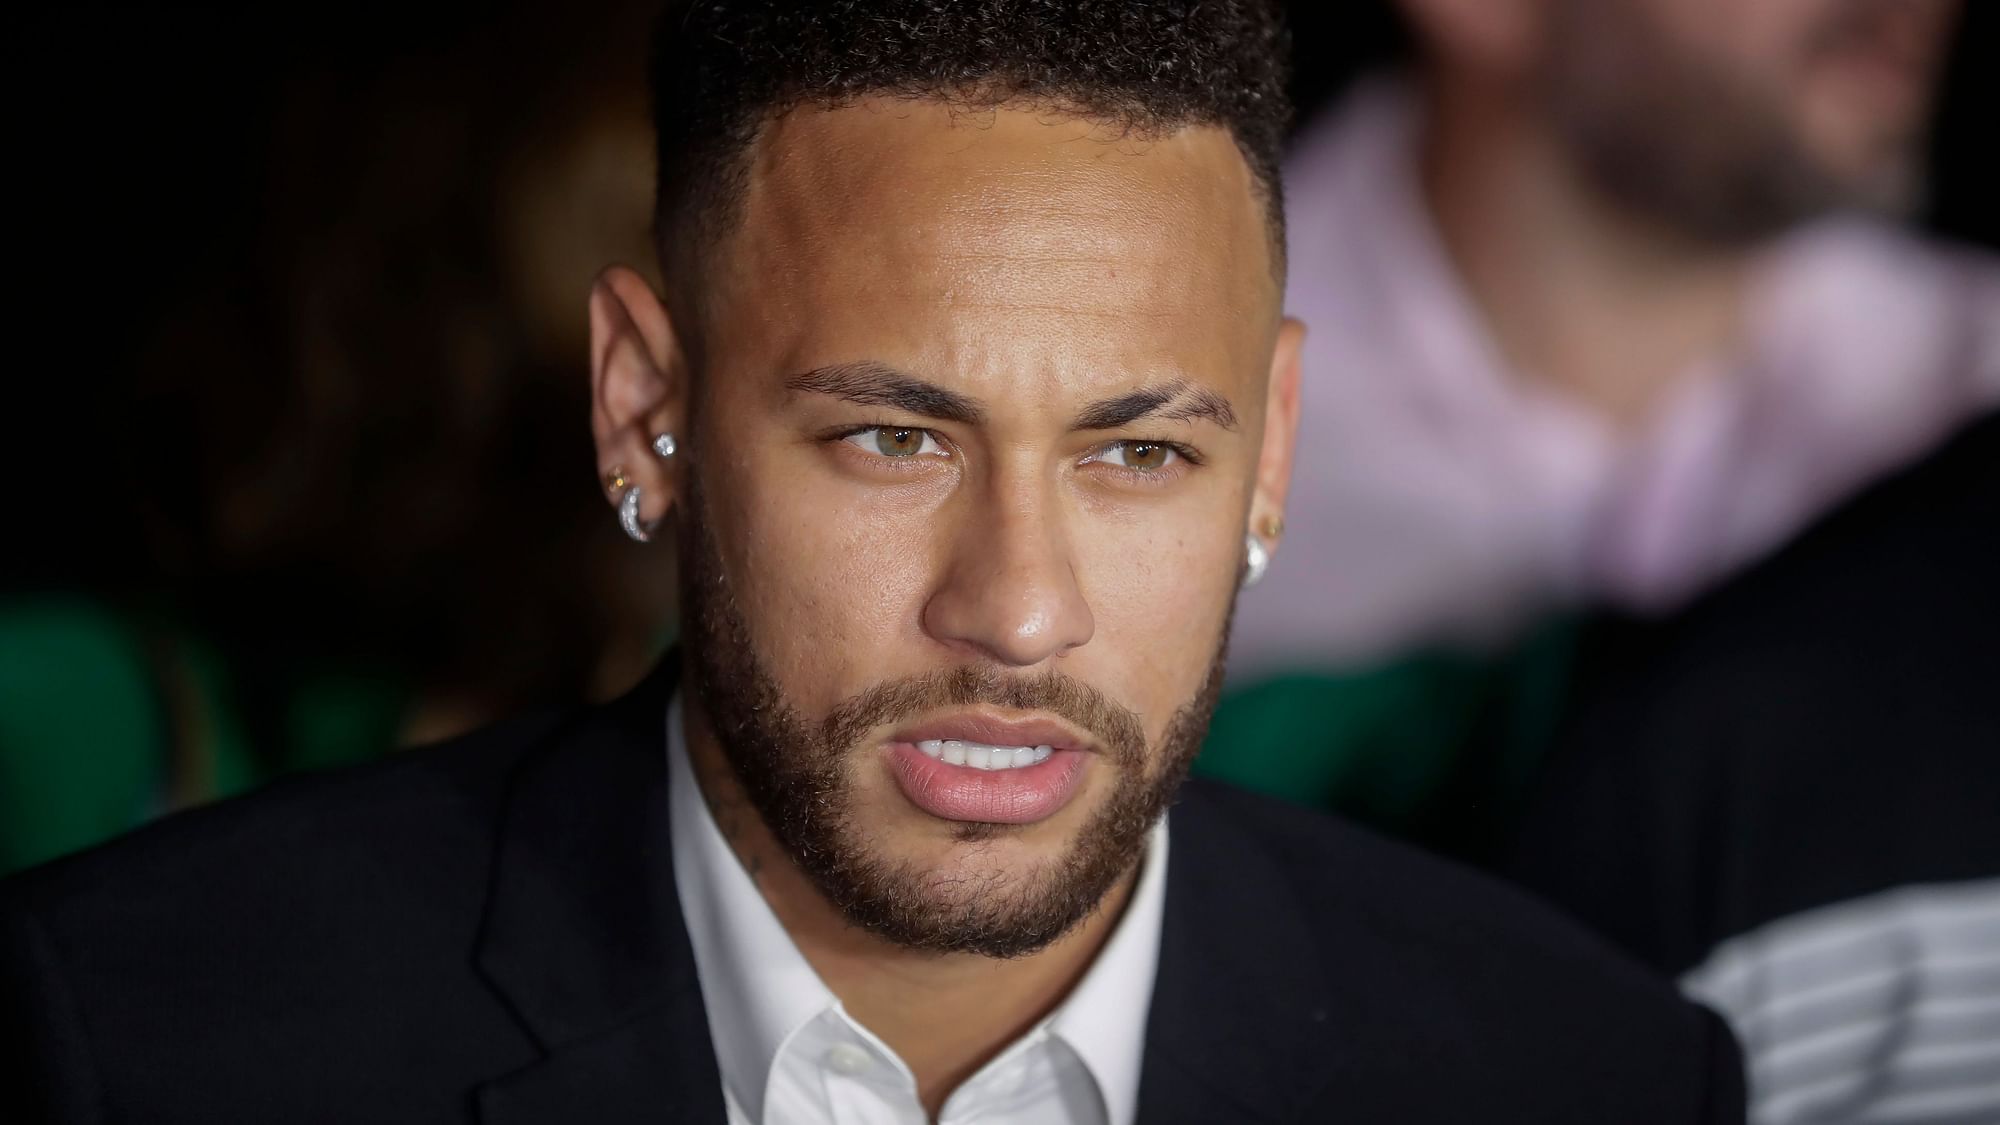 Neymar spoke to the press while leaving the police station where he was questions about the allegations on Thursday, 13 June 2019.